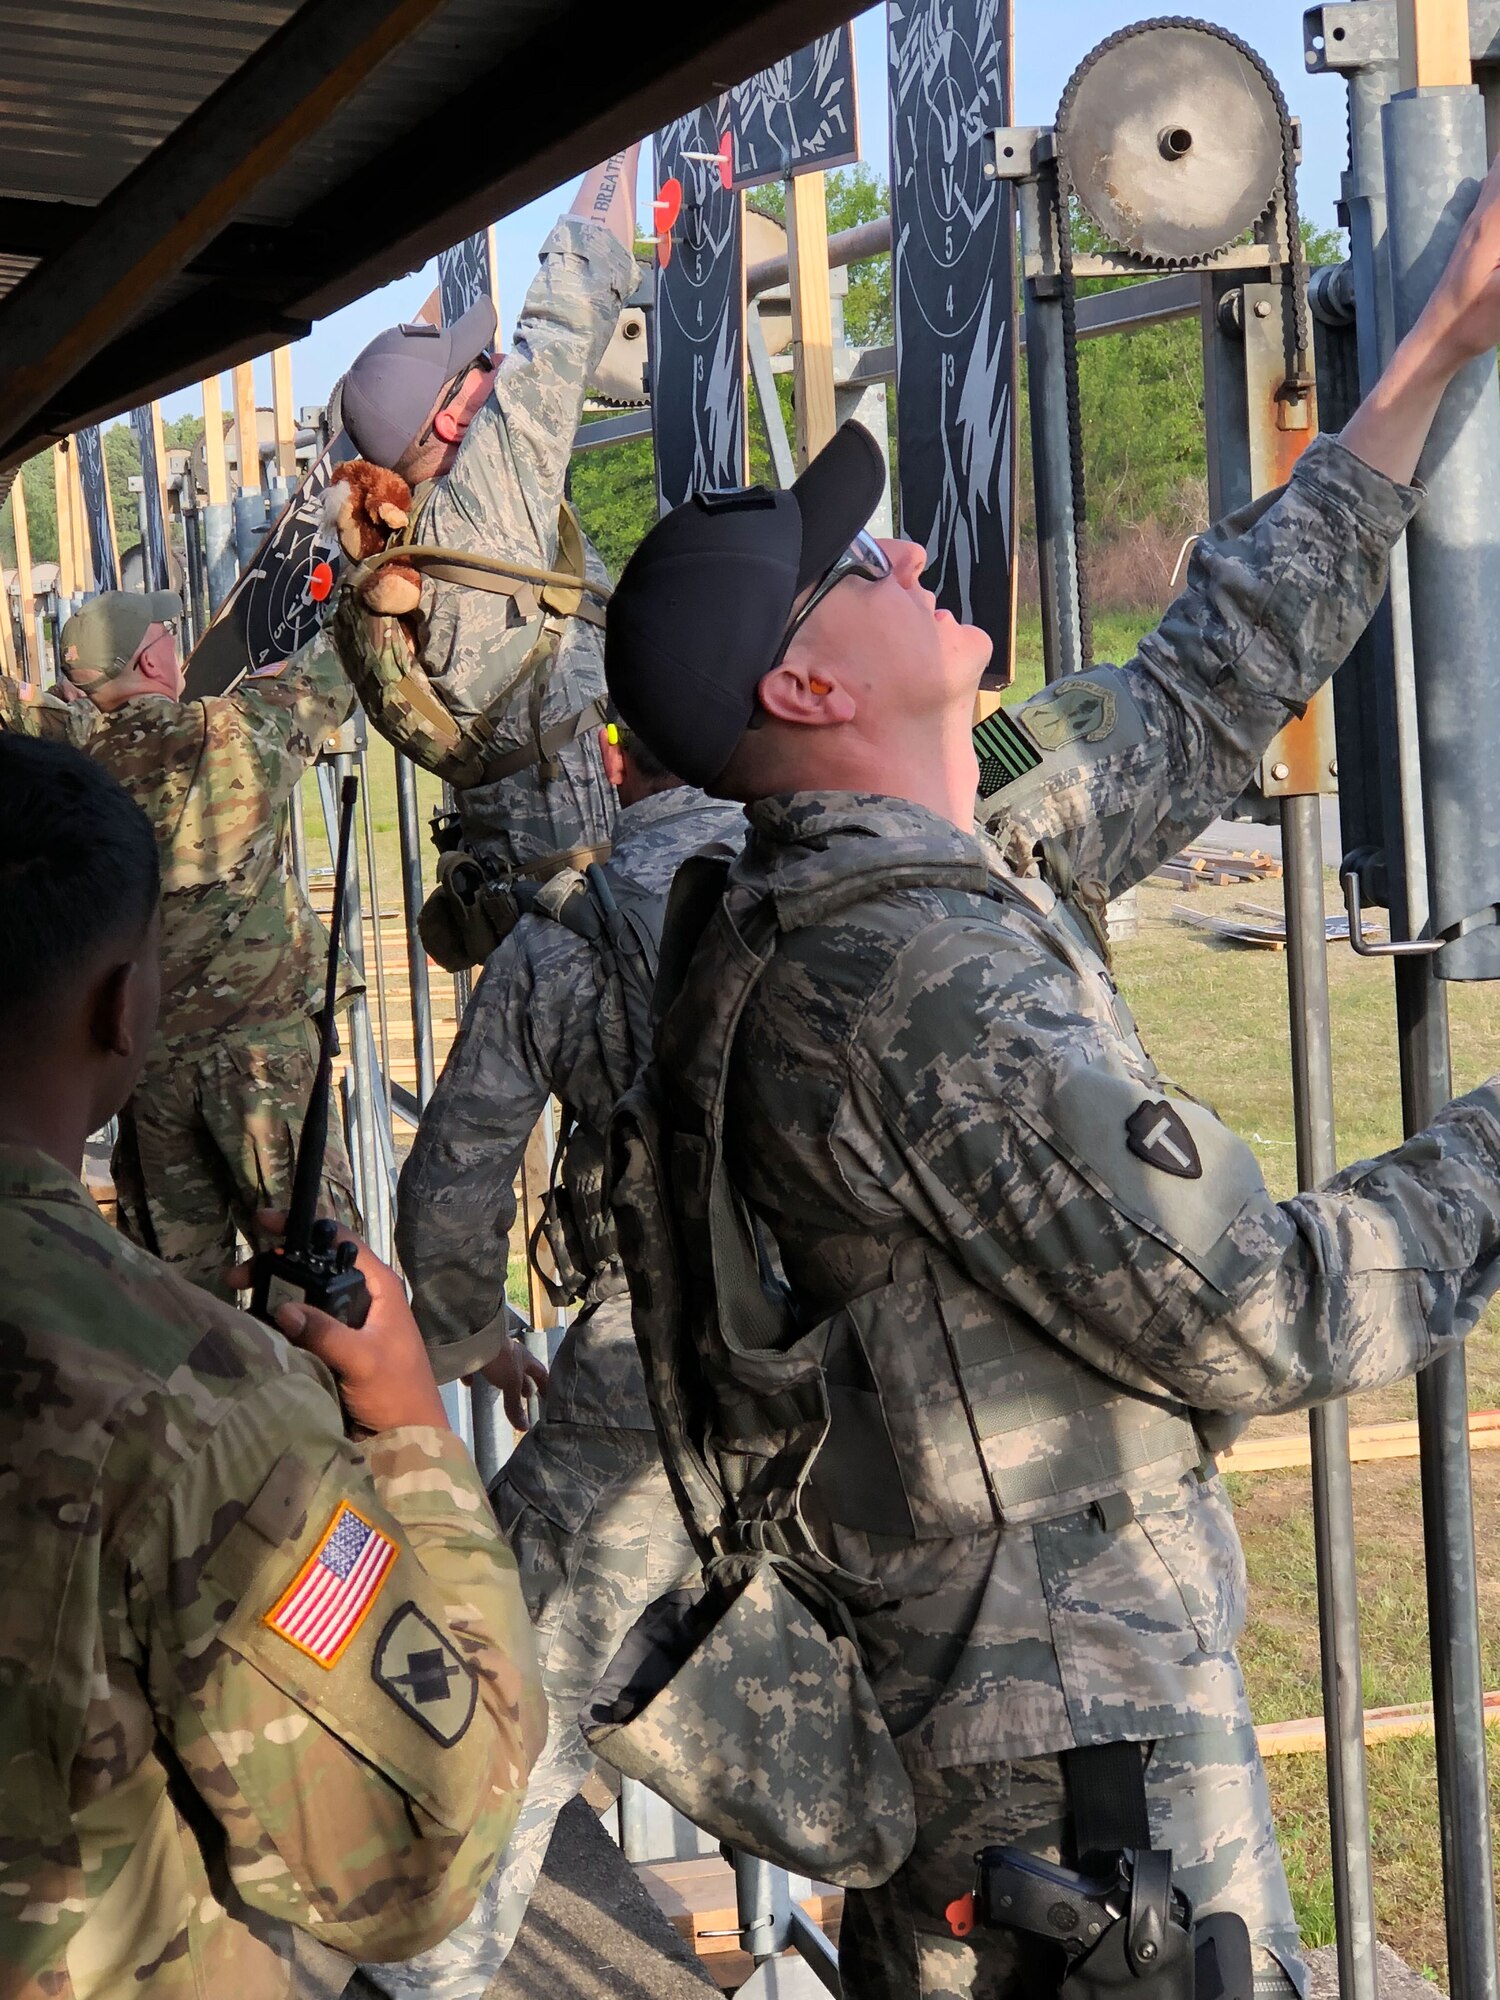 Maj Eric Manewal, 194th Wing, marks targets in the pits during the 47th Annual Winston P. Wilson Championship, Robinson Maneuver Training Center, Arkansas, May 1, 2018.  The annual events, hosted by the National Guard Marksmanship Training Center April 29-May 4, 2018, offer Servicemembers from the National Guard and international community an opportunity to test marksmanship skills in a battle-focused environment. (U.S. Air National Guard photo by Staff Sgt. Hope Funderburk)